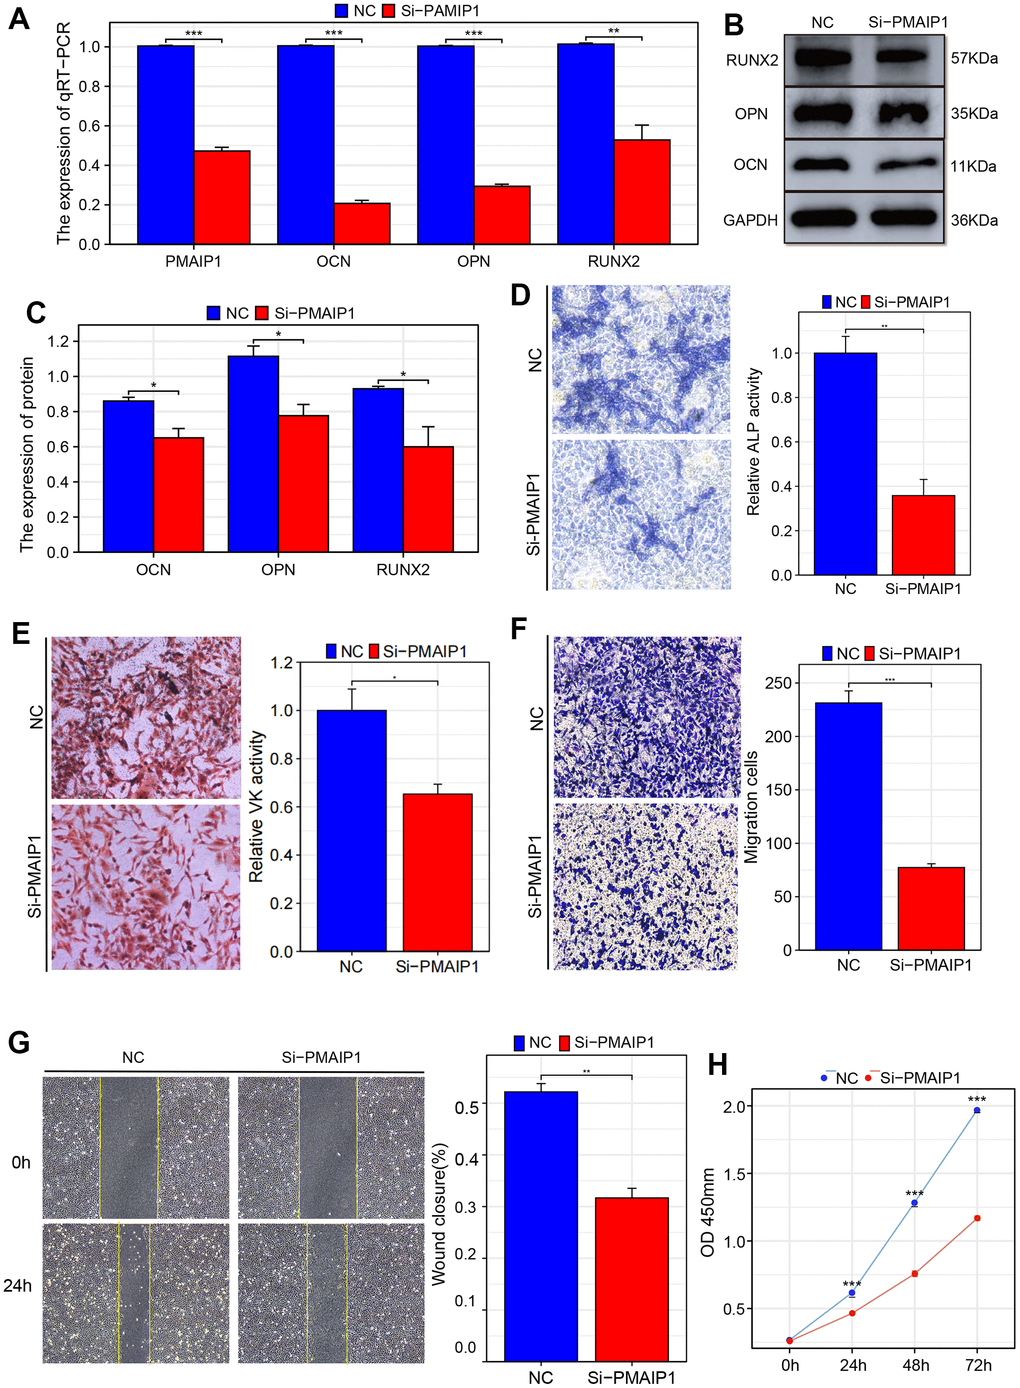 Validation of the influence of PMAIP1 on osteogenesis, migration, and cell growth of BMSCs. (A) RT-qPCR (B, C) Western blotting (D) ALP staining (E) VK staining (F) Transwell assay of migration (G) Wound healing assay (H) CCK-8 assay.